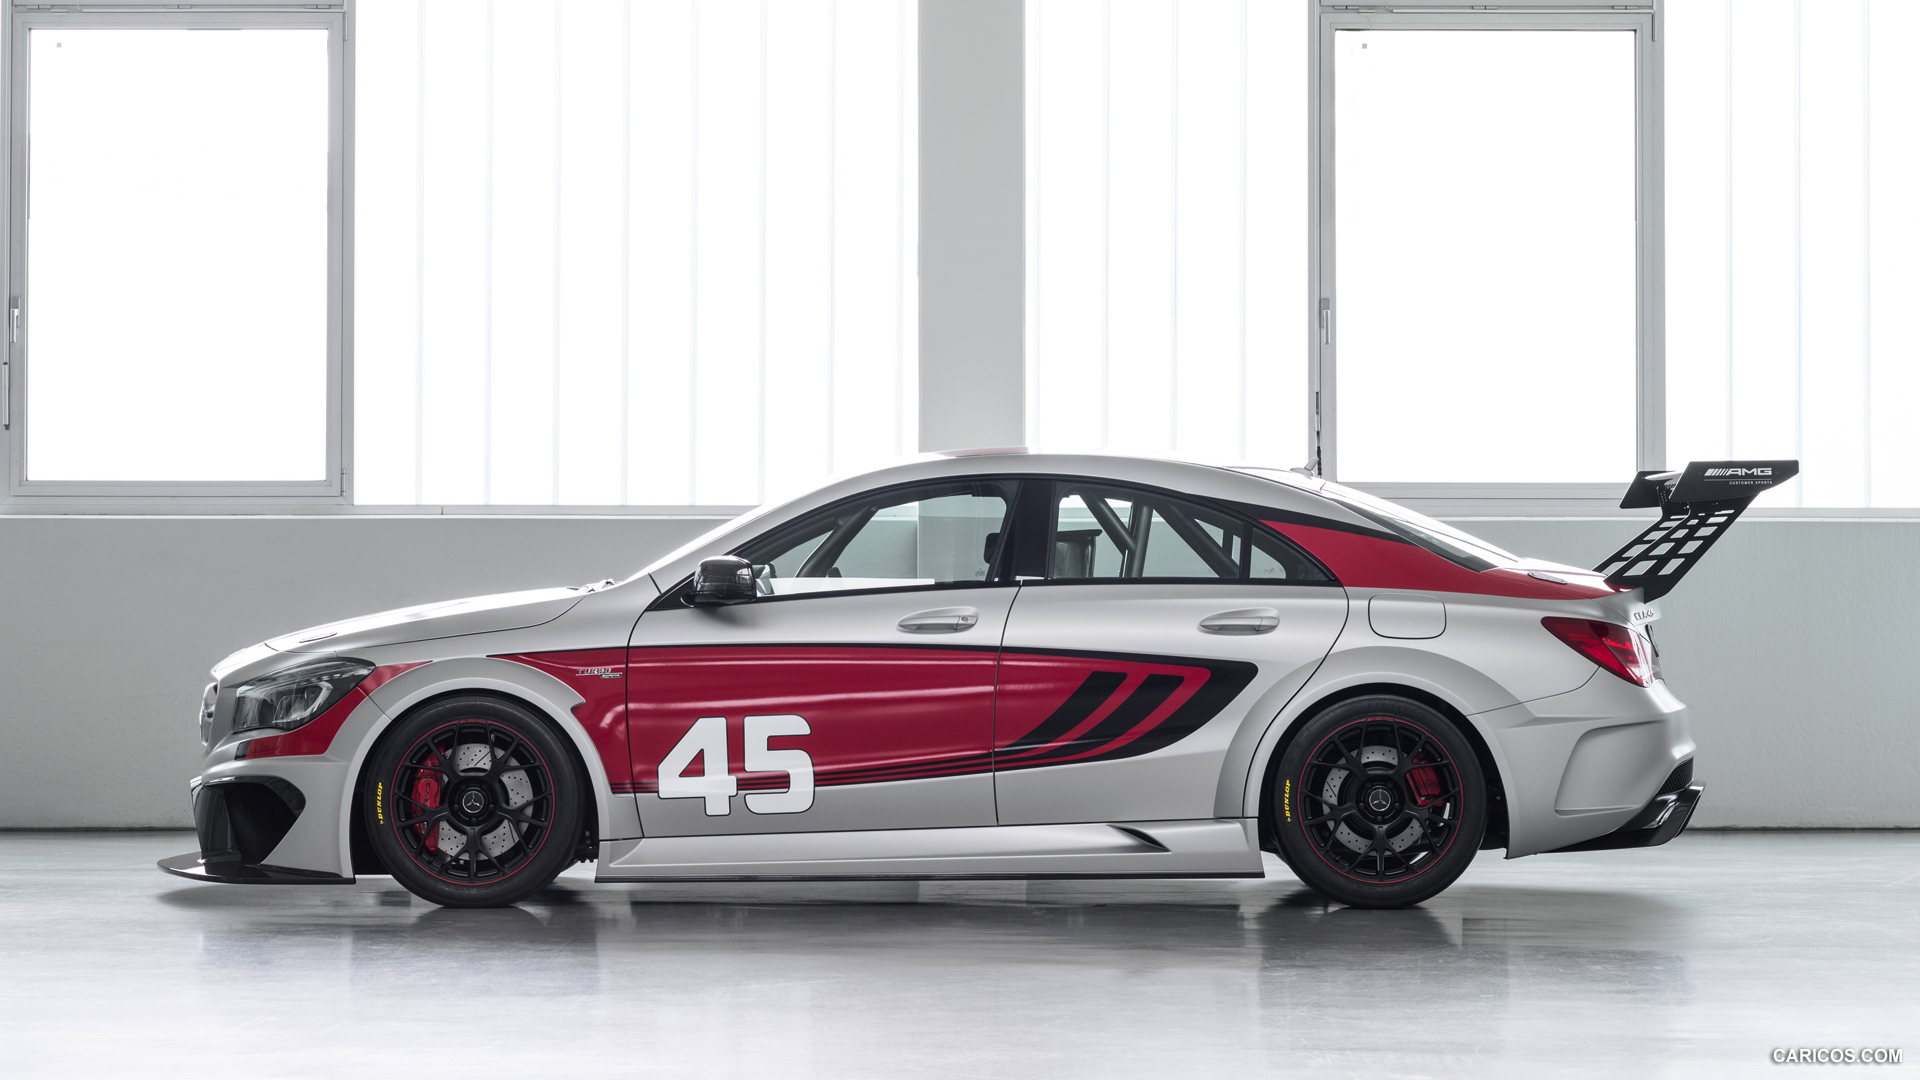 2013 Mercedes-Benz CLA 45 AMG Racing Series Concept  - Side, #12 of 26